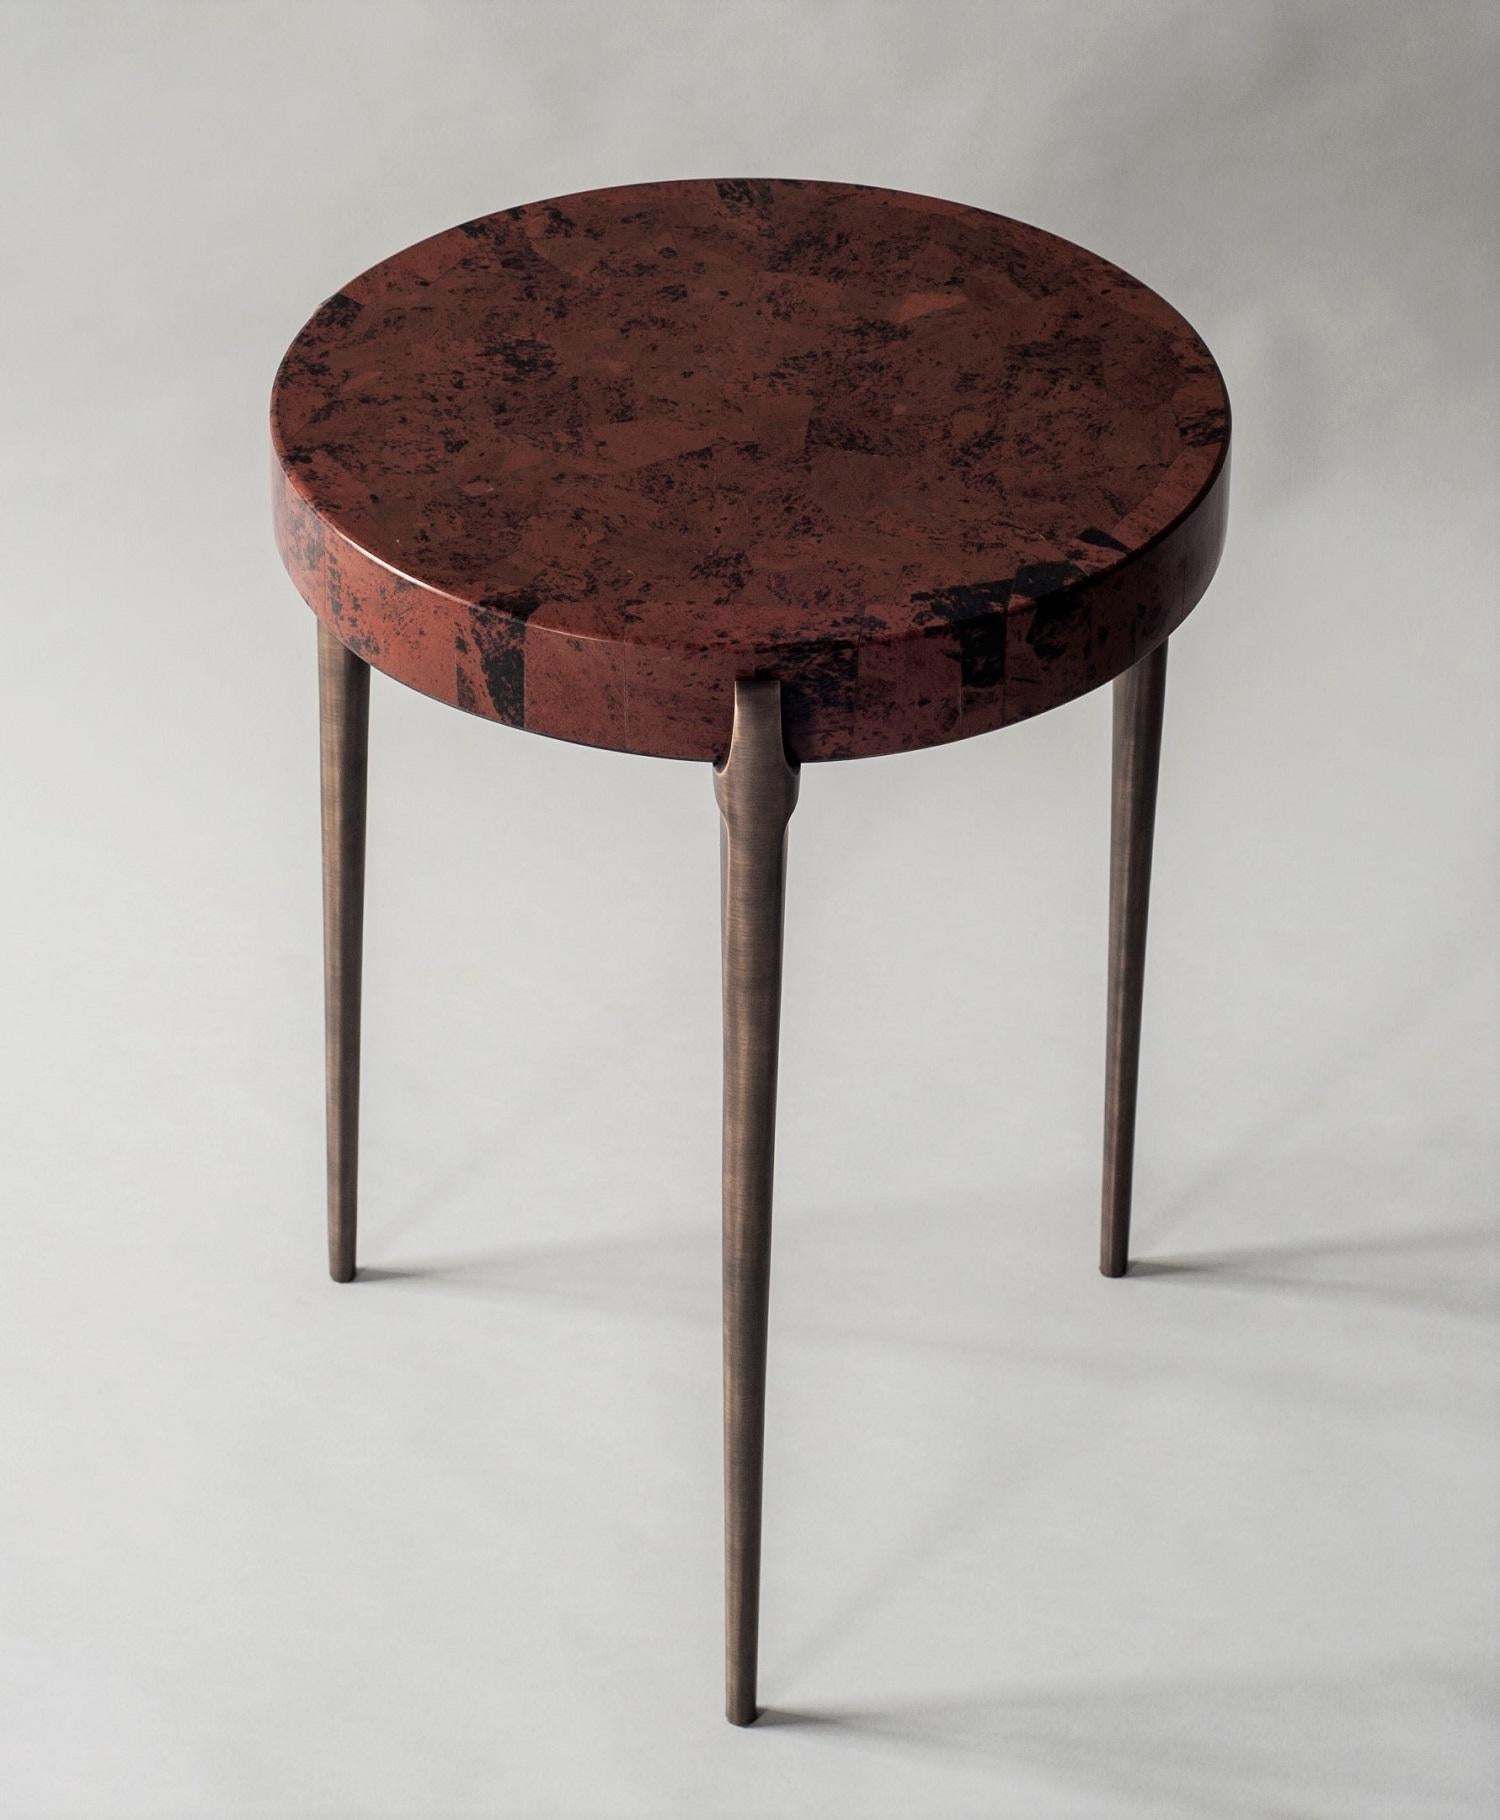 The Acantha side table’s recessed top sits precisely within the supports of three hand-cast bronze legs. The minimal lines of this piece are designed to highlight the natural beauty of the Marconi tabletop, a semi-precious stone with rich red and